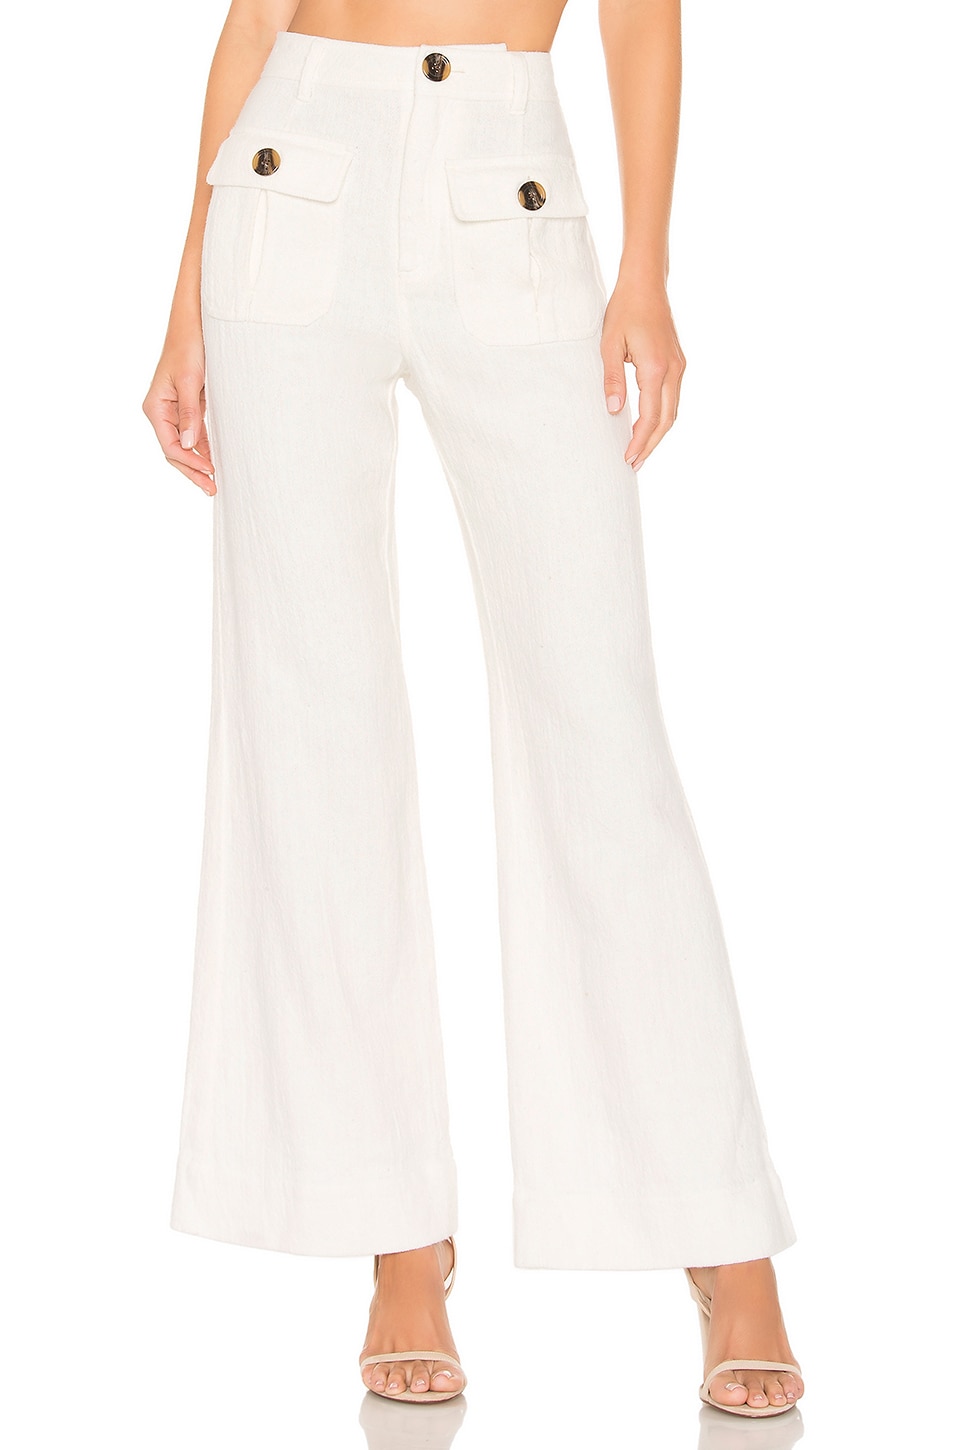 Free People Boca Bell Pant in White | REVOLVE